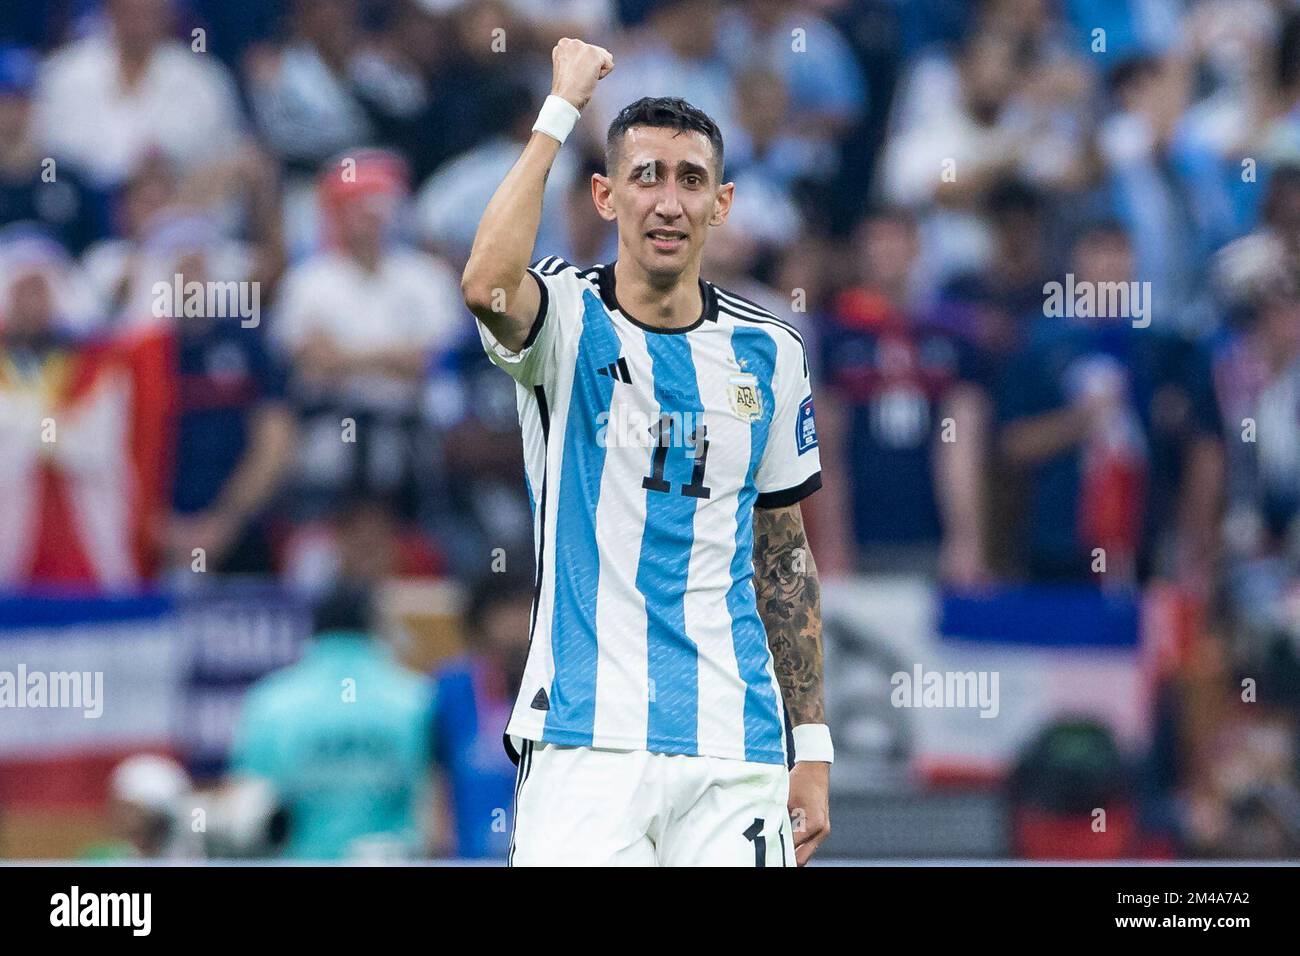 Lusail, Qatar. 18th Dec, 2022. Soccer: World Cup, Argentina - France, final round, final, Lusail Stadium, Argentina's Ángel di Maria cheers after his goal for 2:0. Credit: Tom Weller/dpa/Alamy Live News Stock Photo